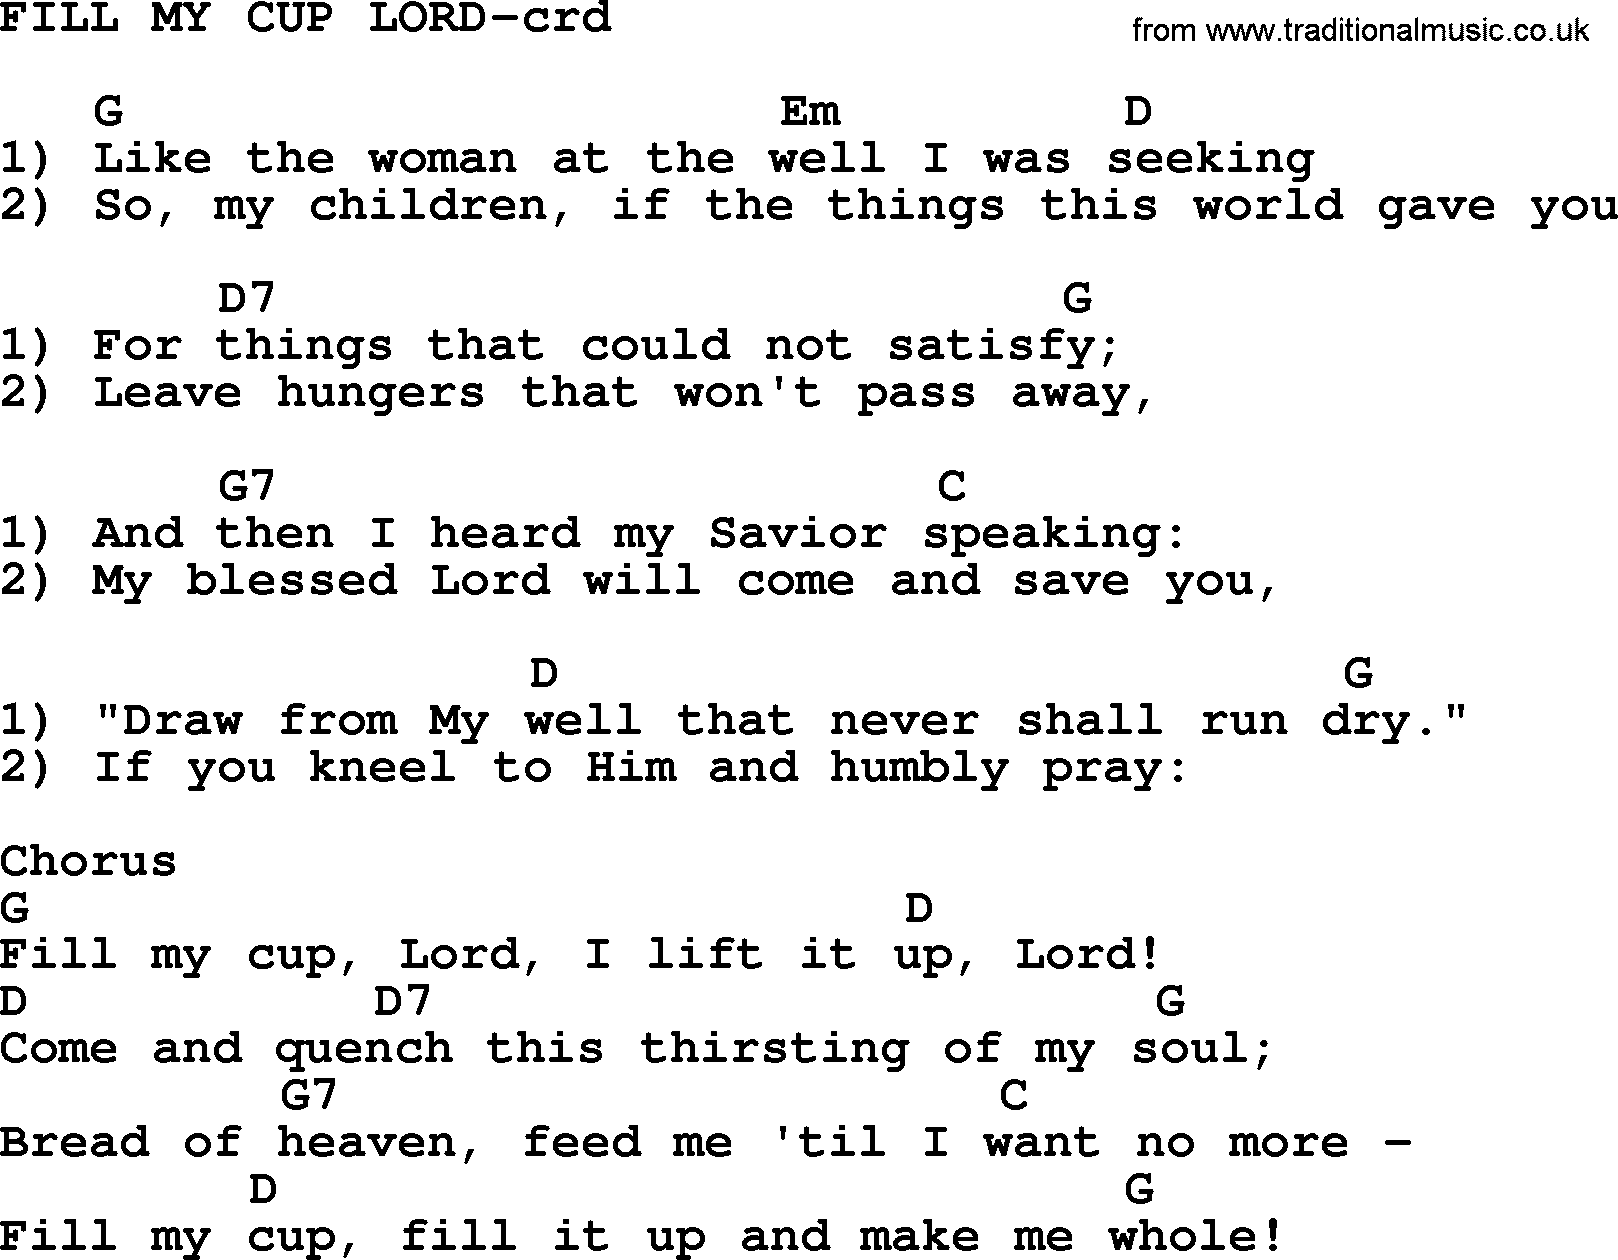 Top 500 Hymn: Fill My Cup Lord, lyrics and chords